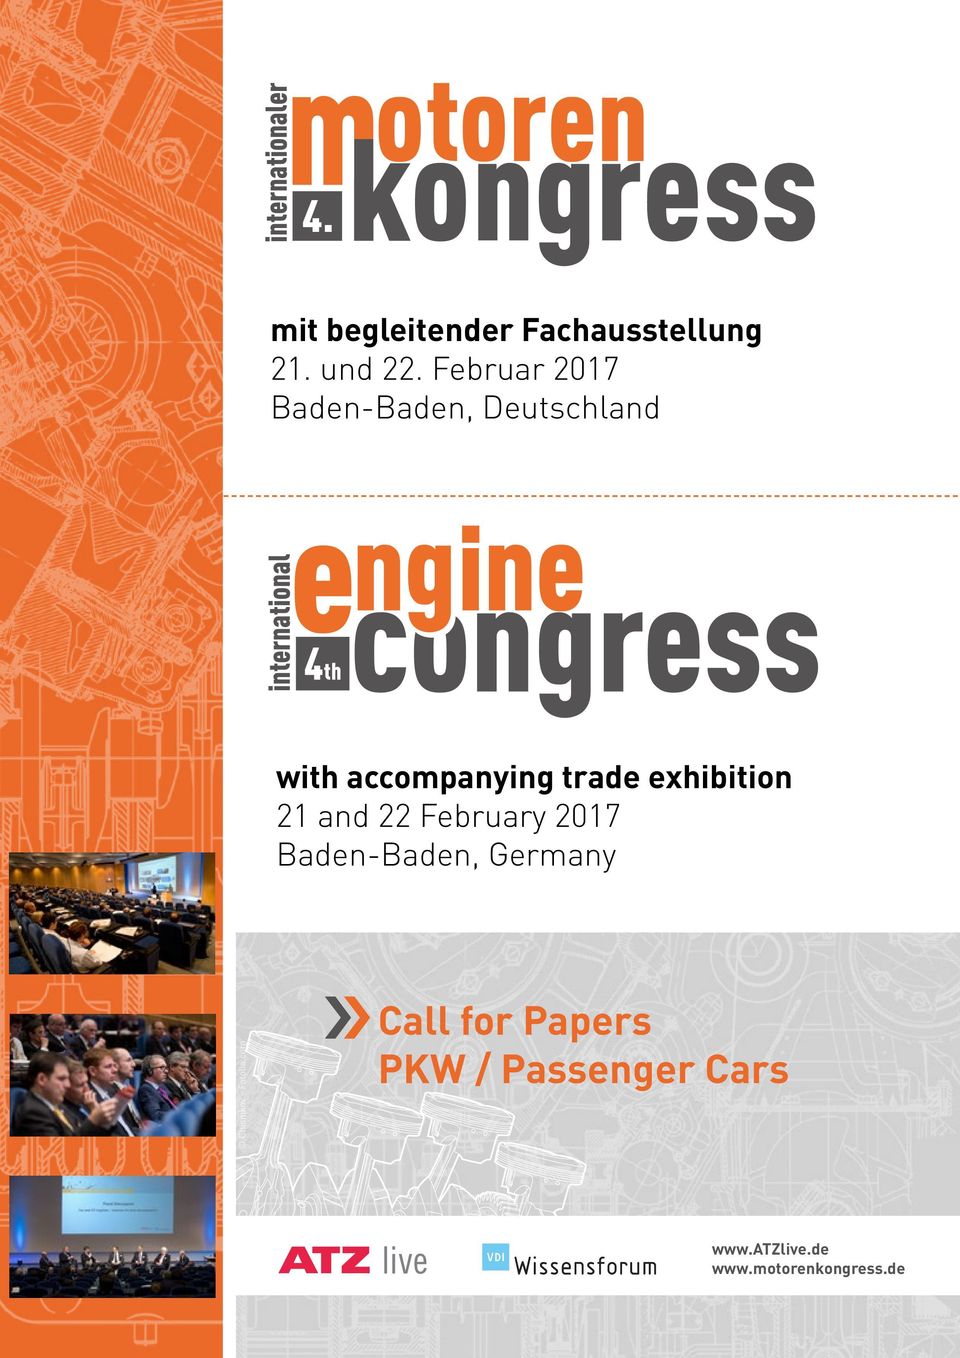 exhibition 21 and 22 February 2017 Baden-Baden, Germany